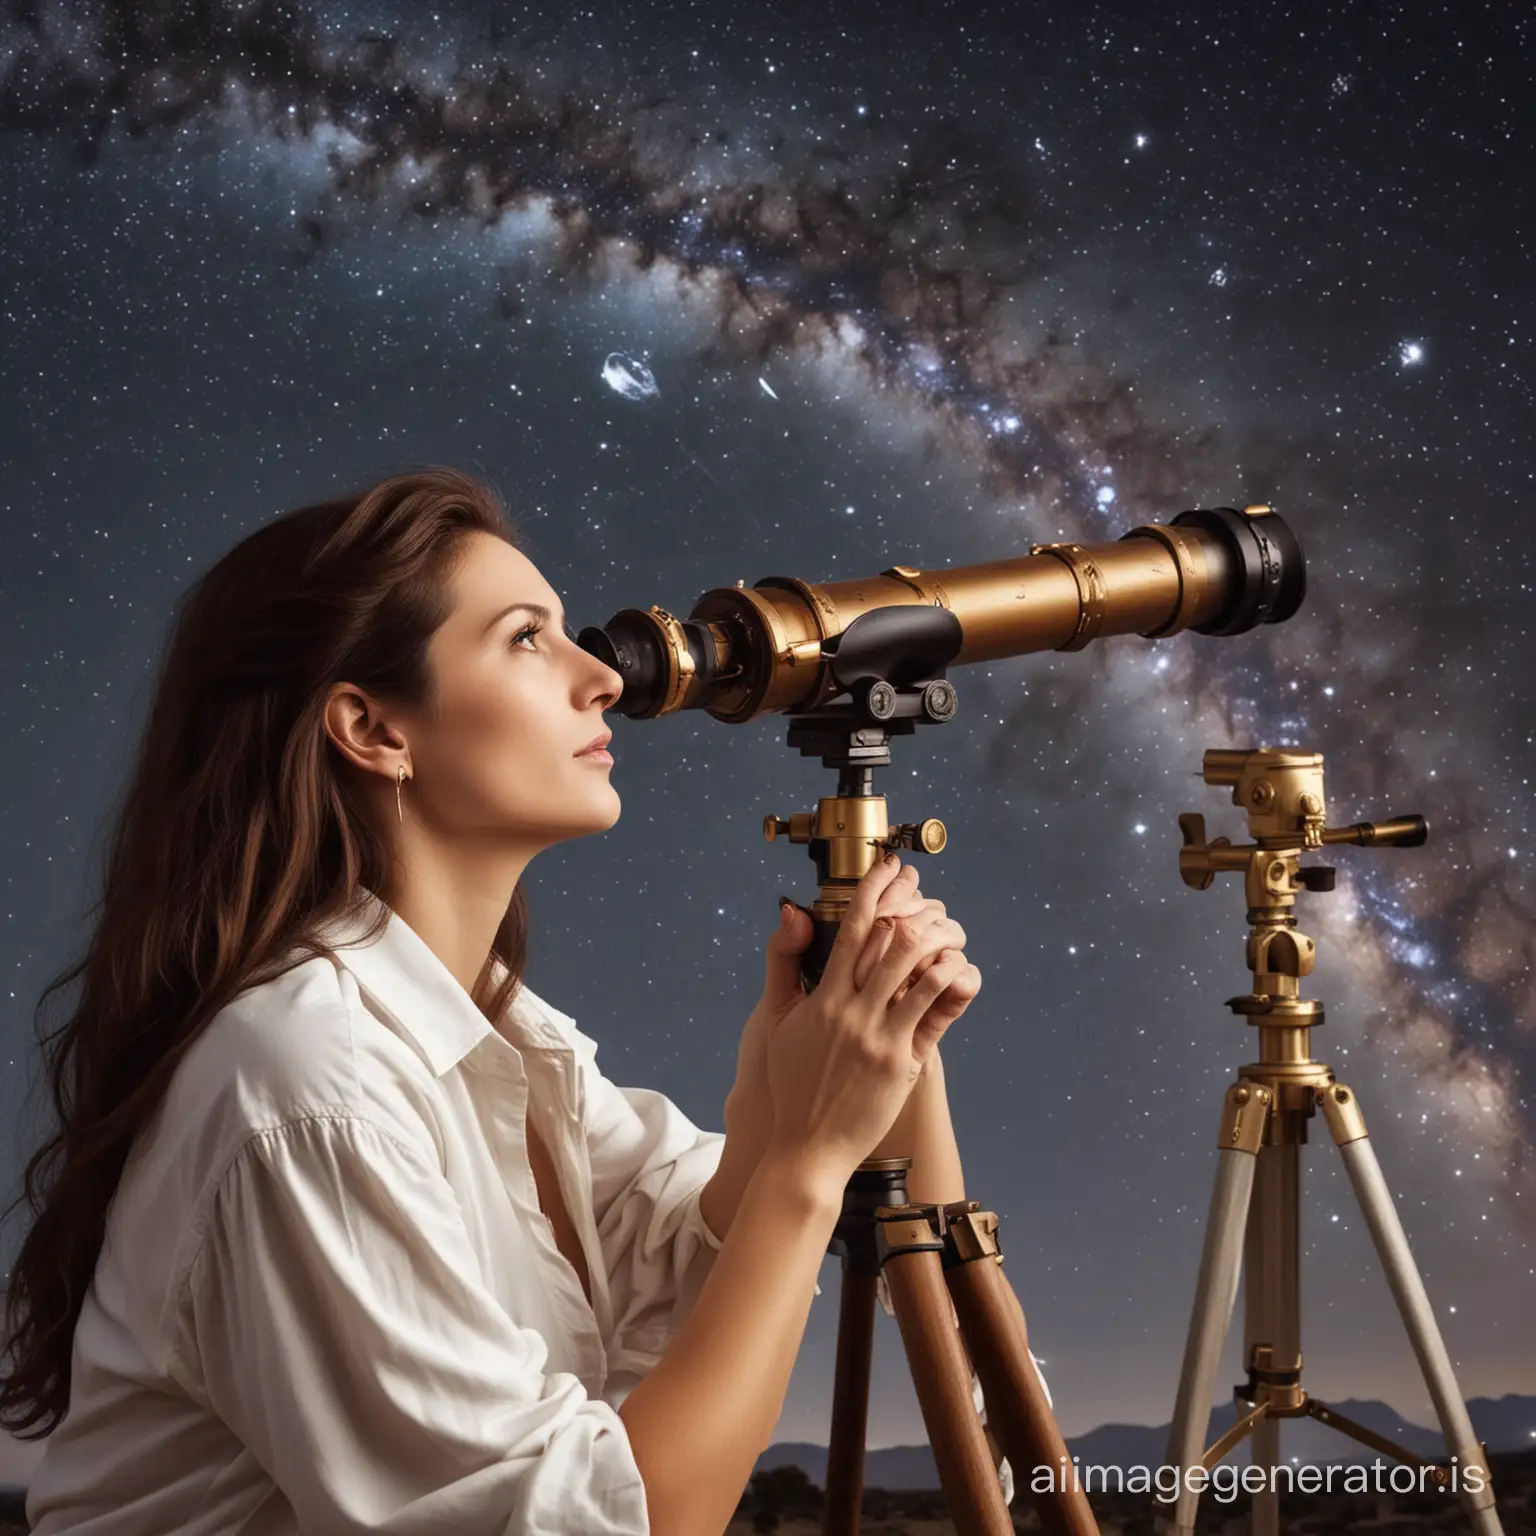 Western female astrologer, watching astronomy through a telescope, 12 zodiac signs